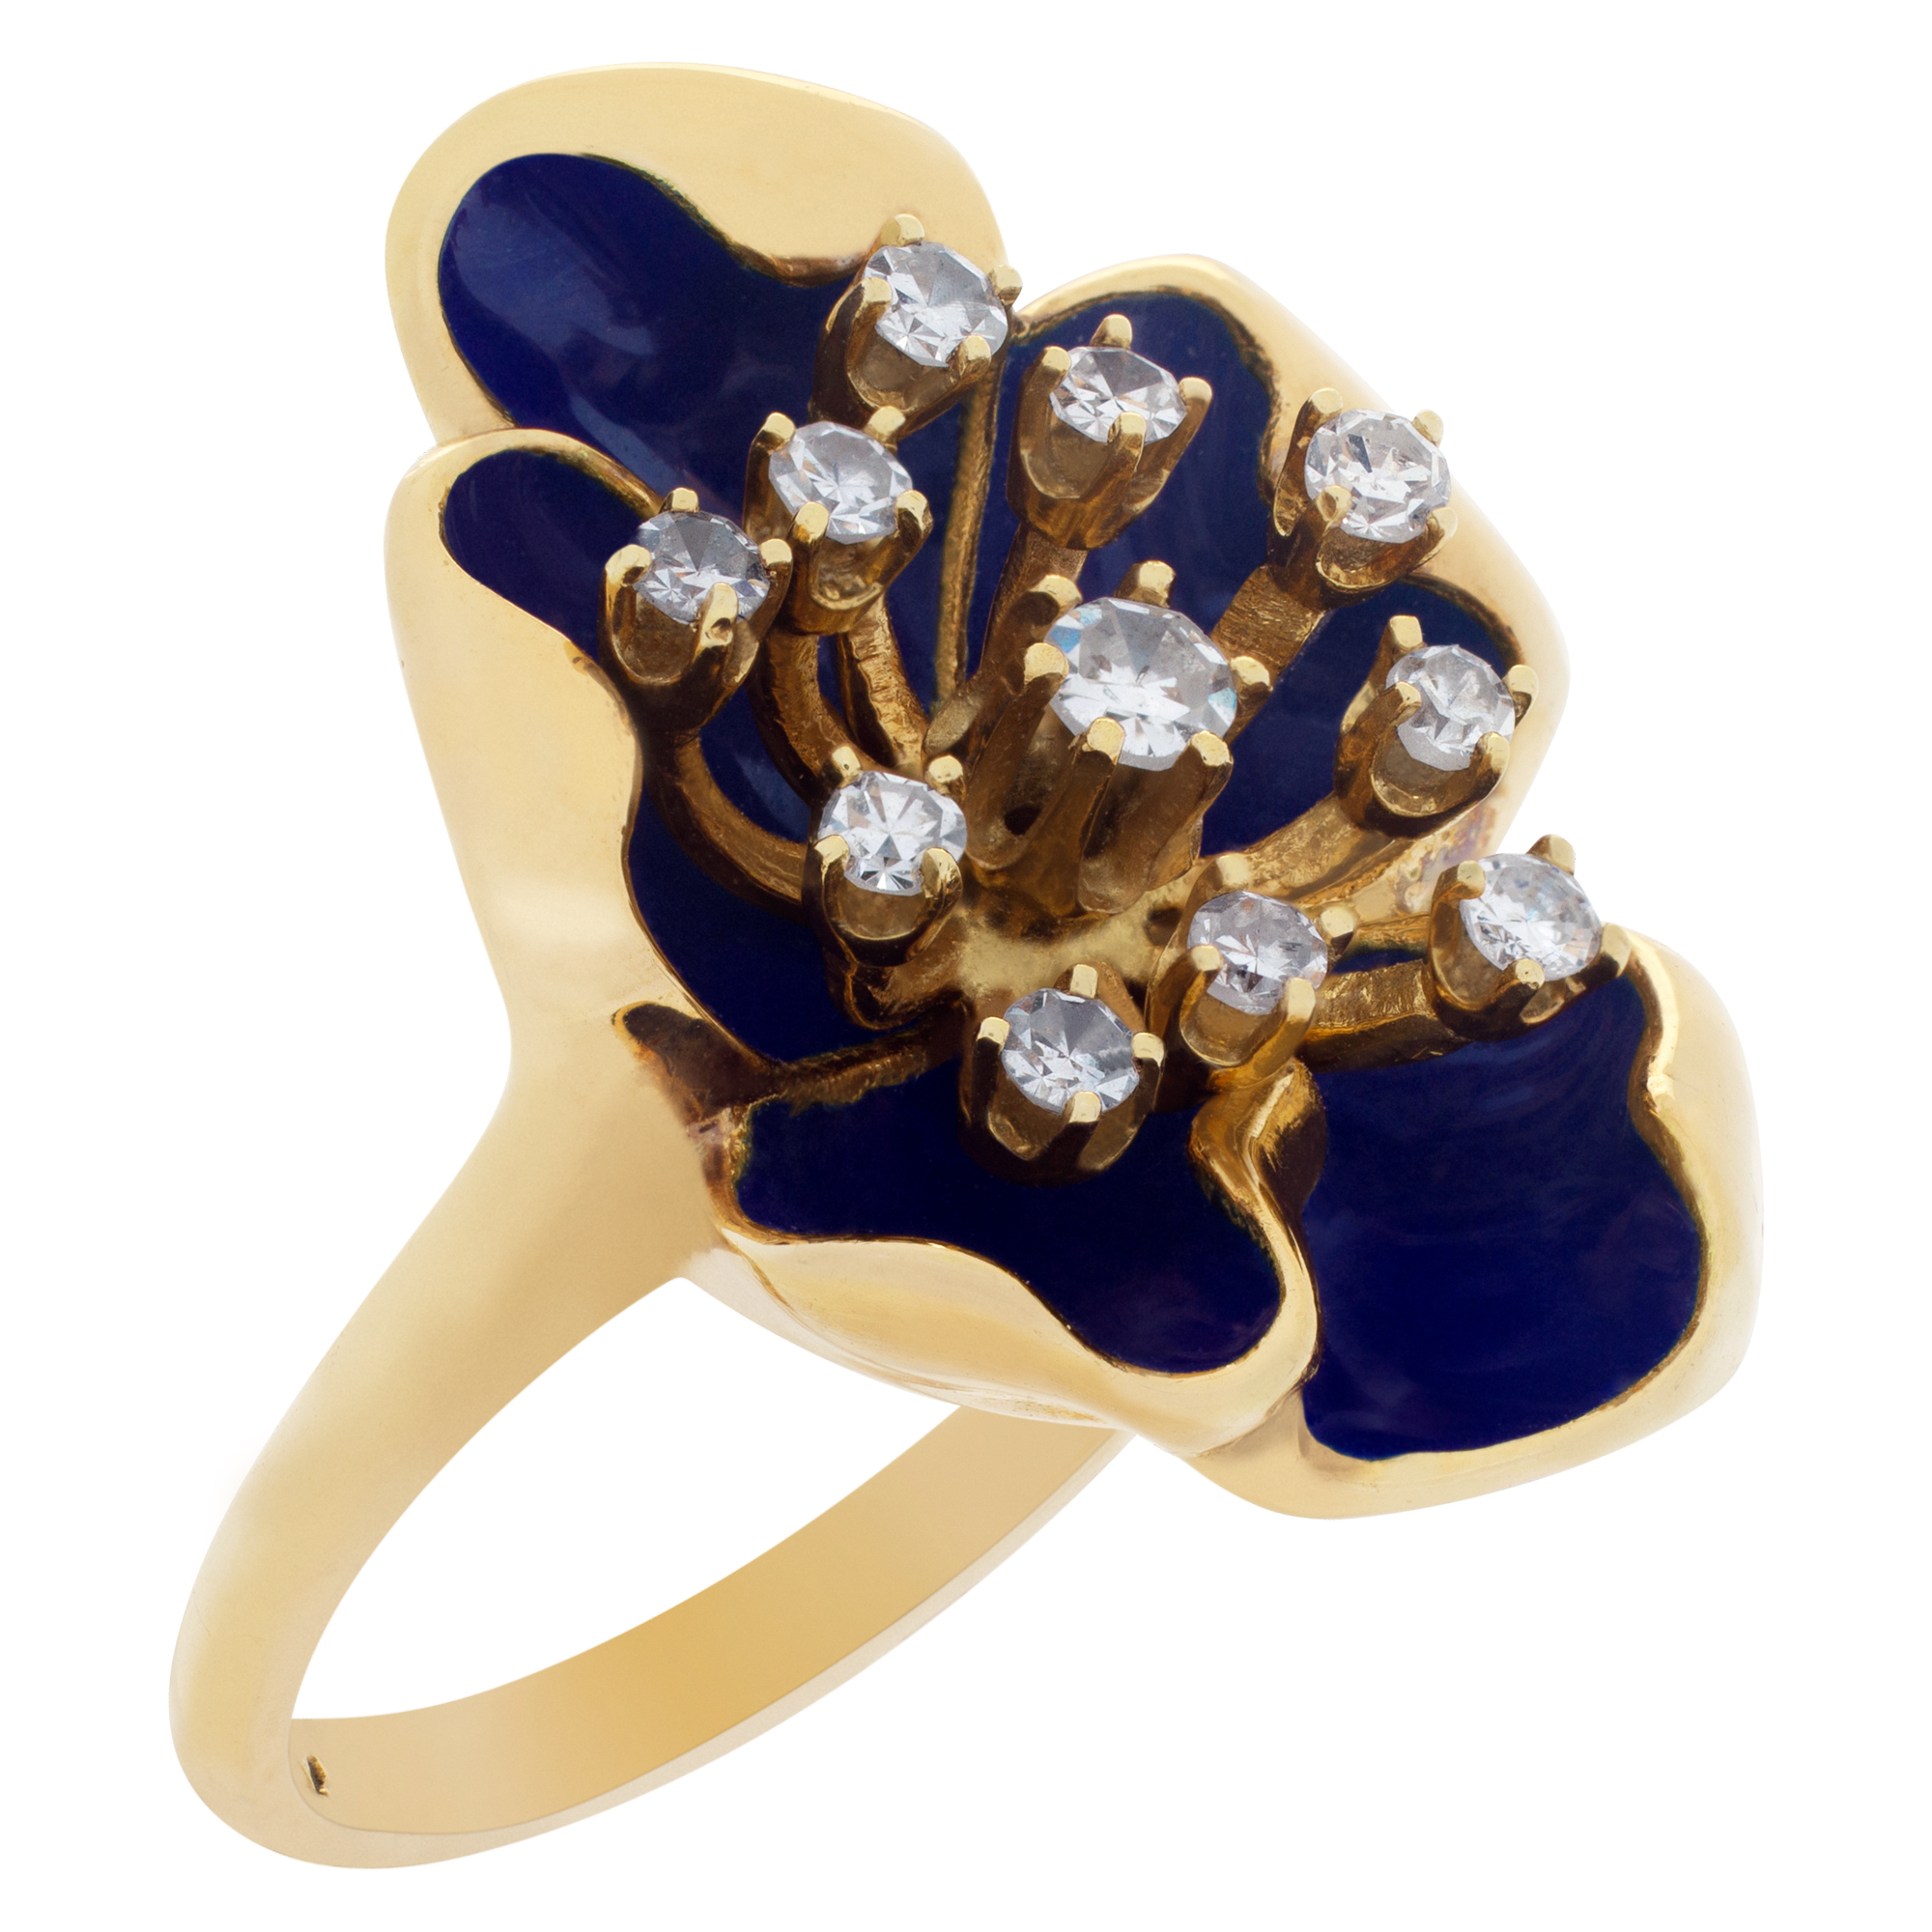 Flower Shape Enamel And Diamond Ring In 14k yellow gold. Size 5.75 image 3